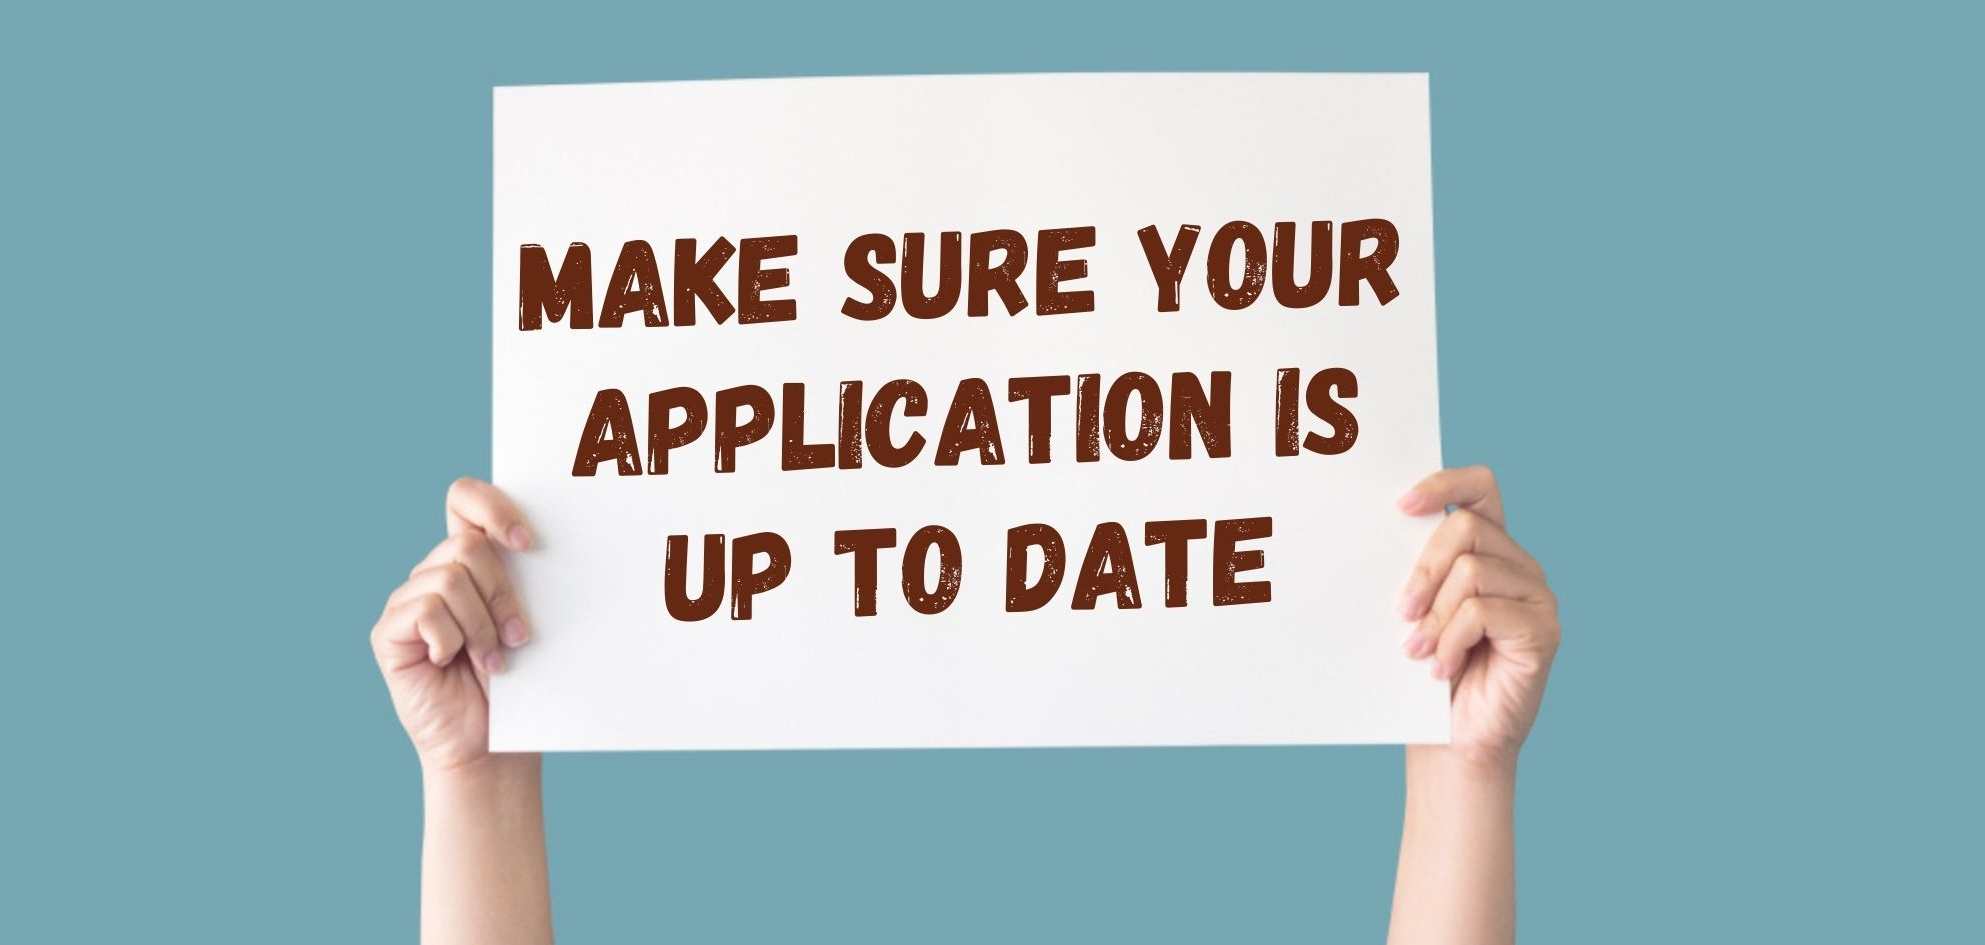 Make sure your application is up to date